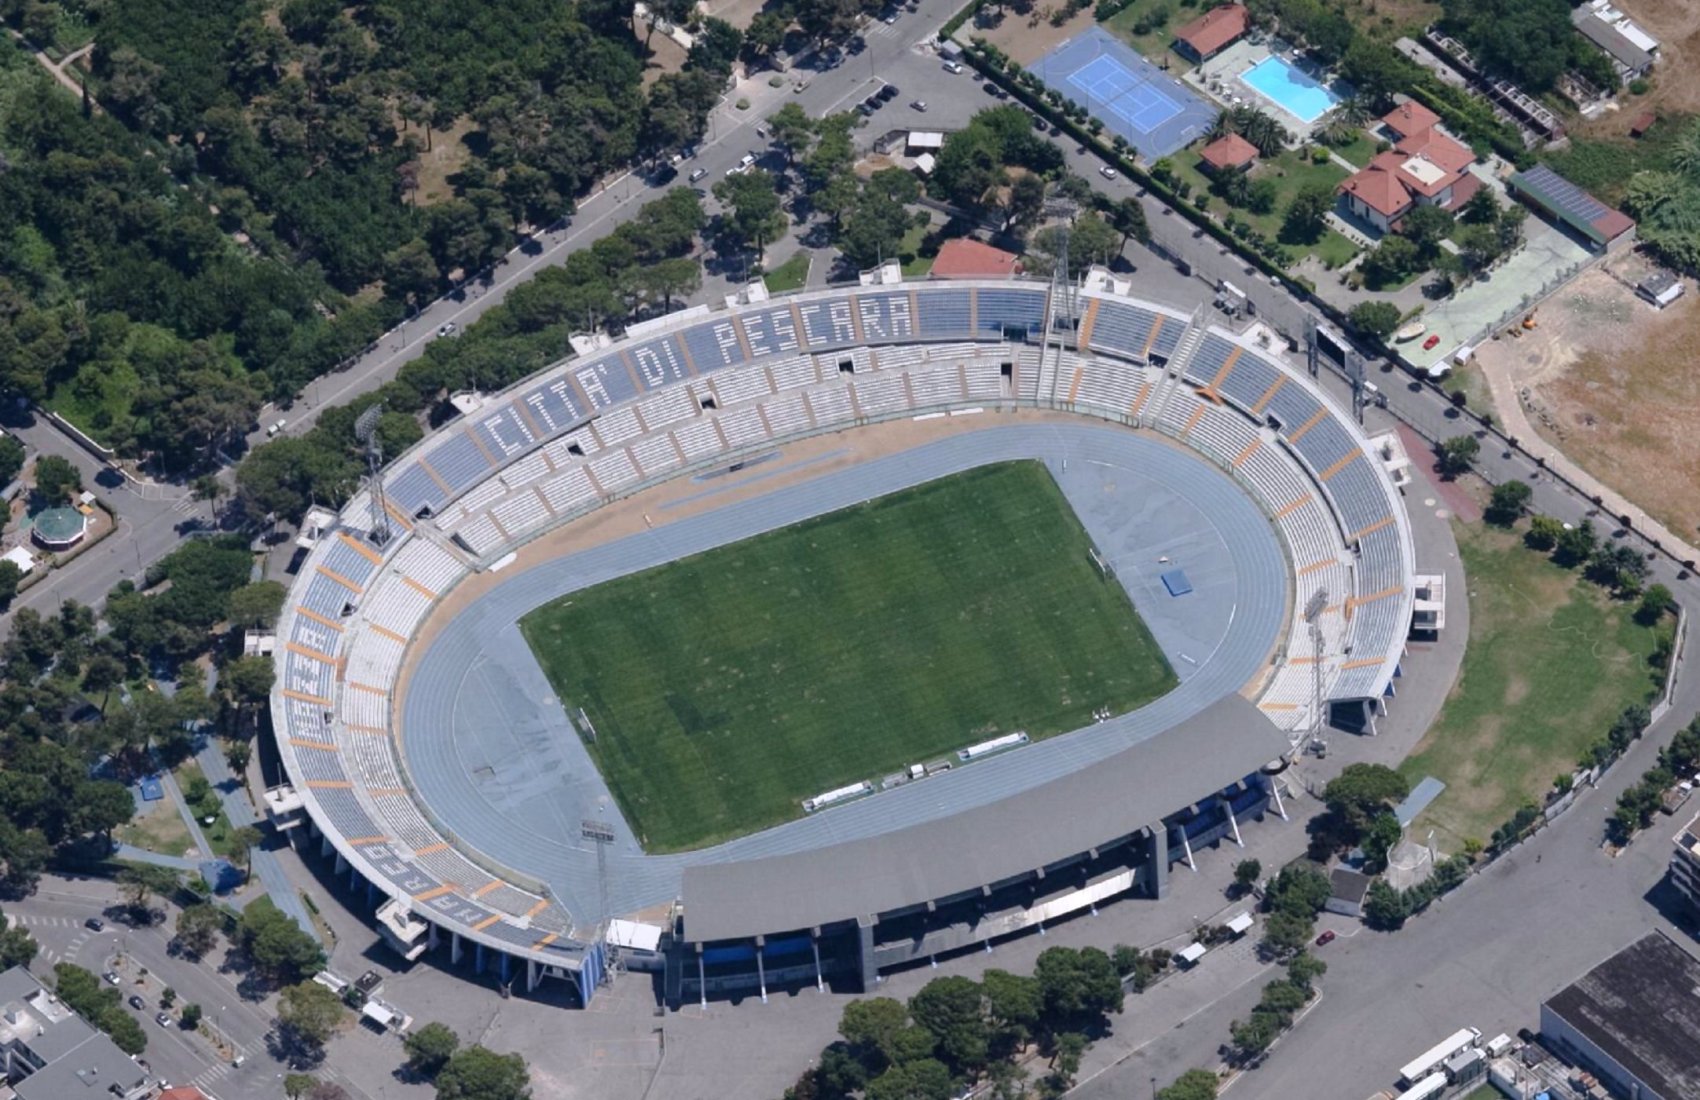 This aerial view of the Stadio Adriatico - now also known as Giovanni Cornacchia - shows just how big is the distance between the stands and the pitch in Pescara's home turf